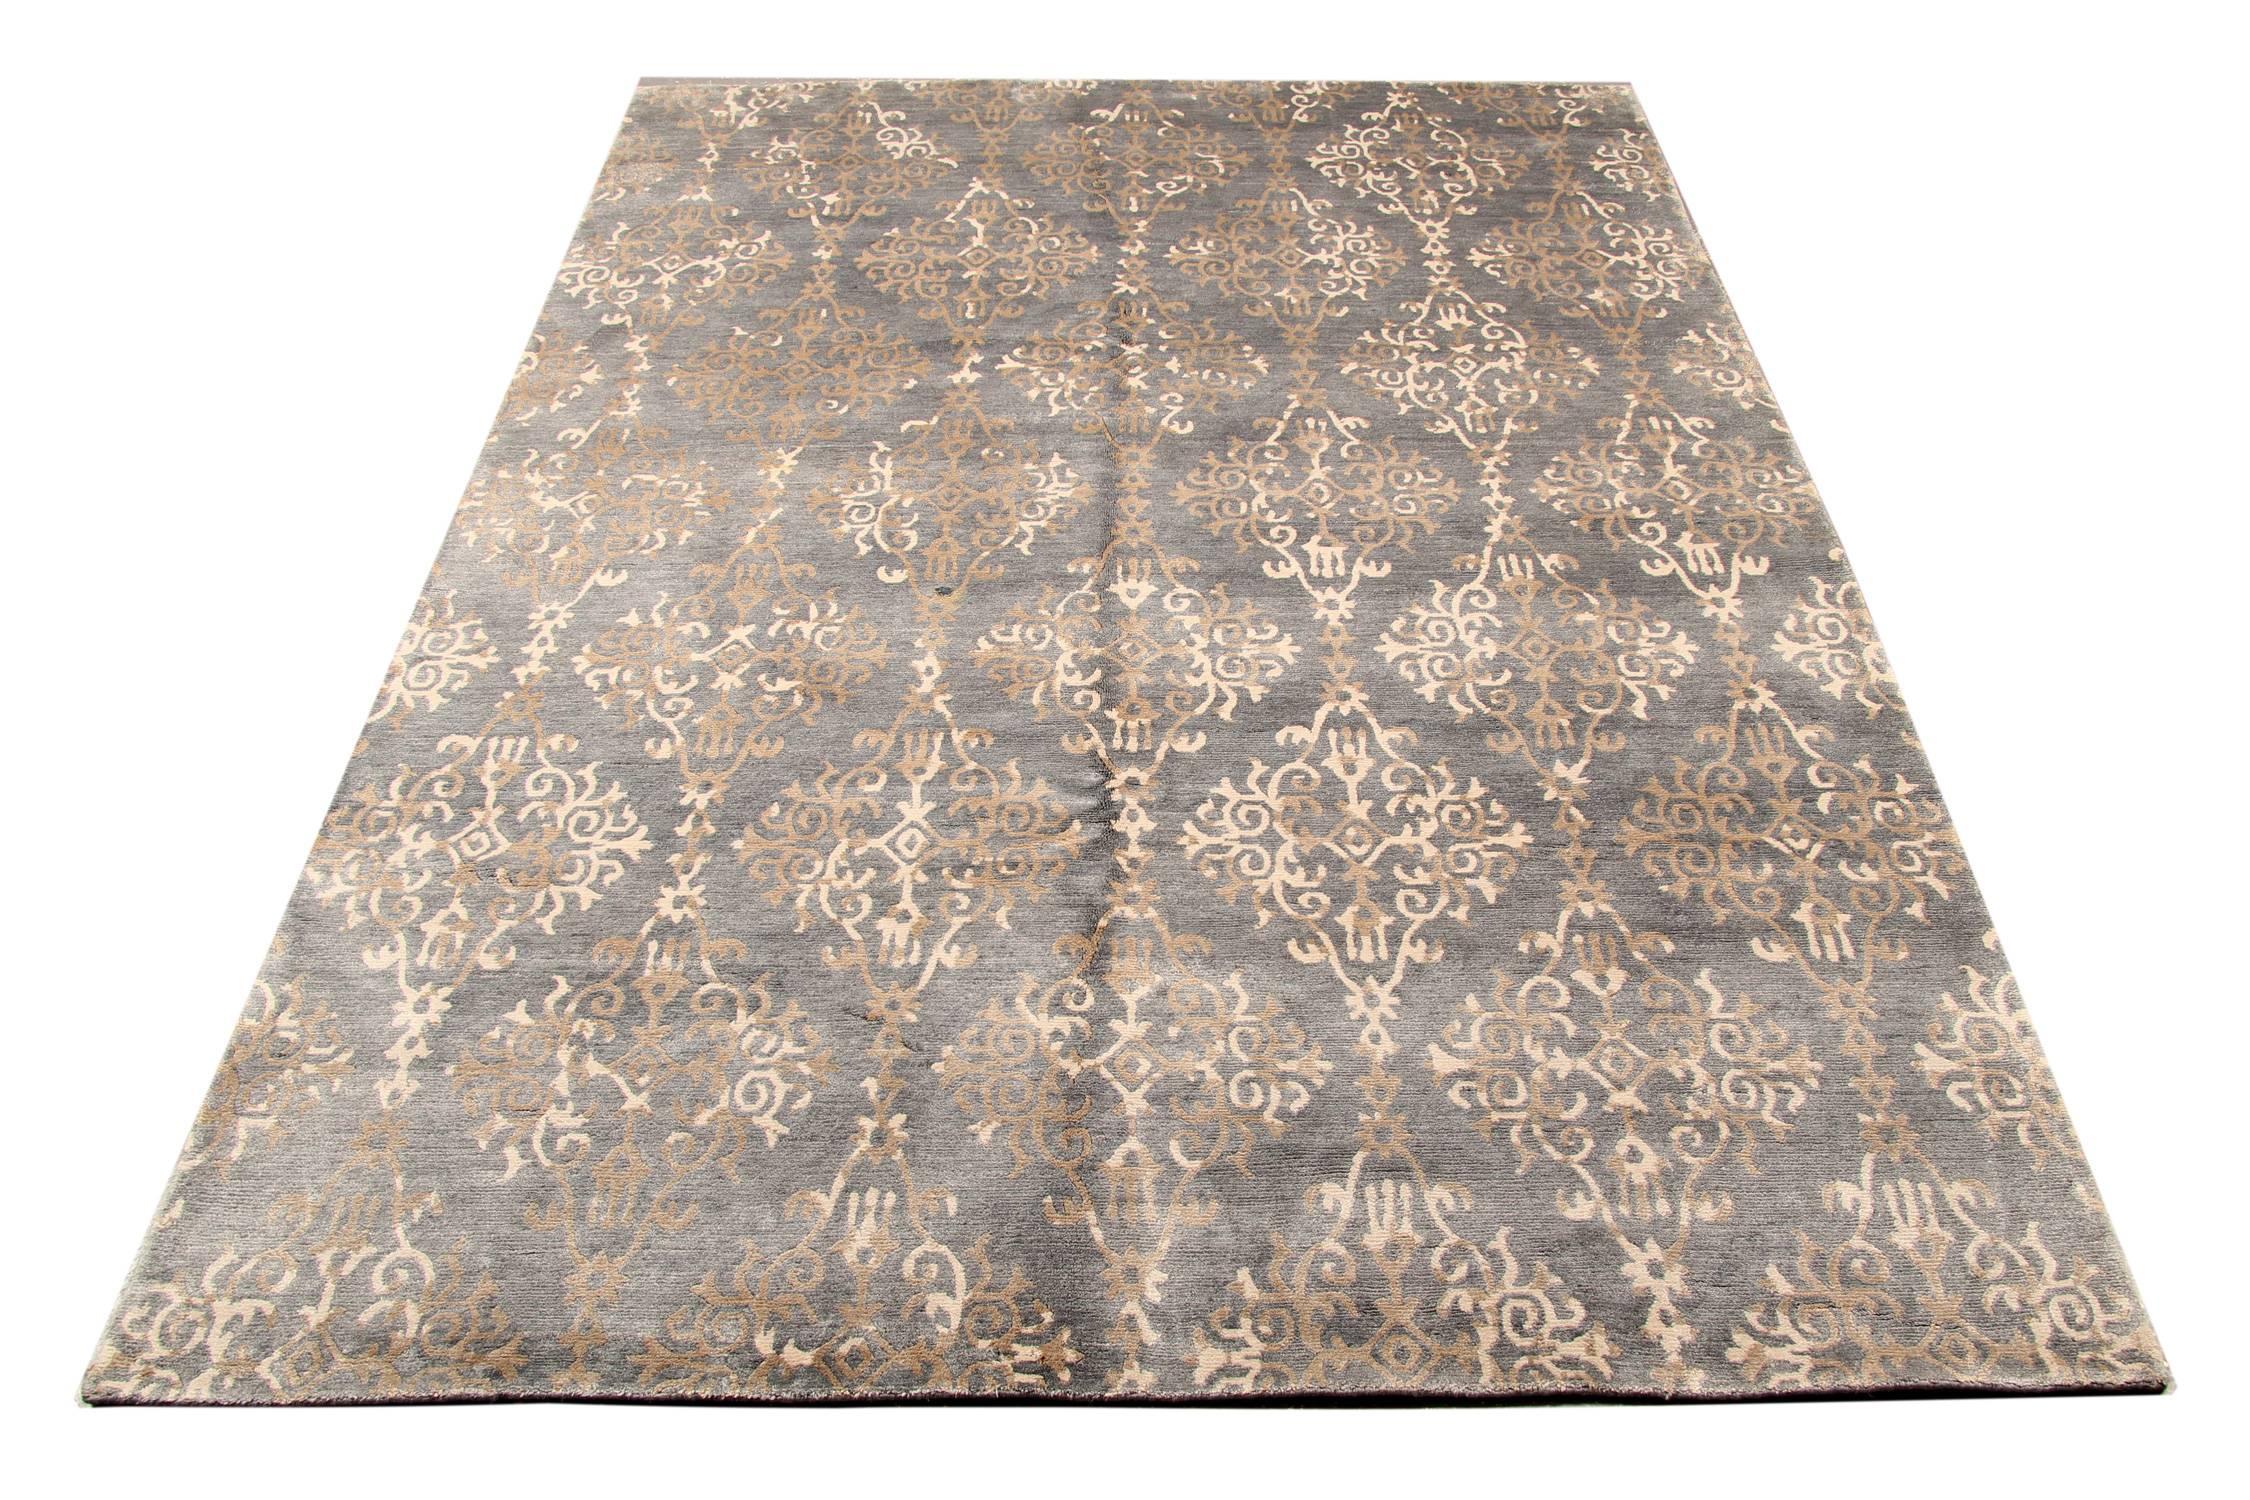 This transitional rug has an inherently sophisticated quality, from adding texture to monochromatic interiors to keeping the overall design scheme controlled instead of wild. A transitional grey field rug like this one has the power to connect